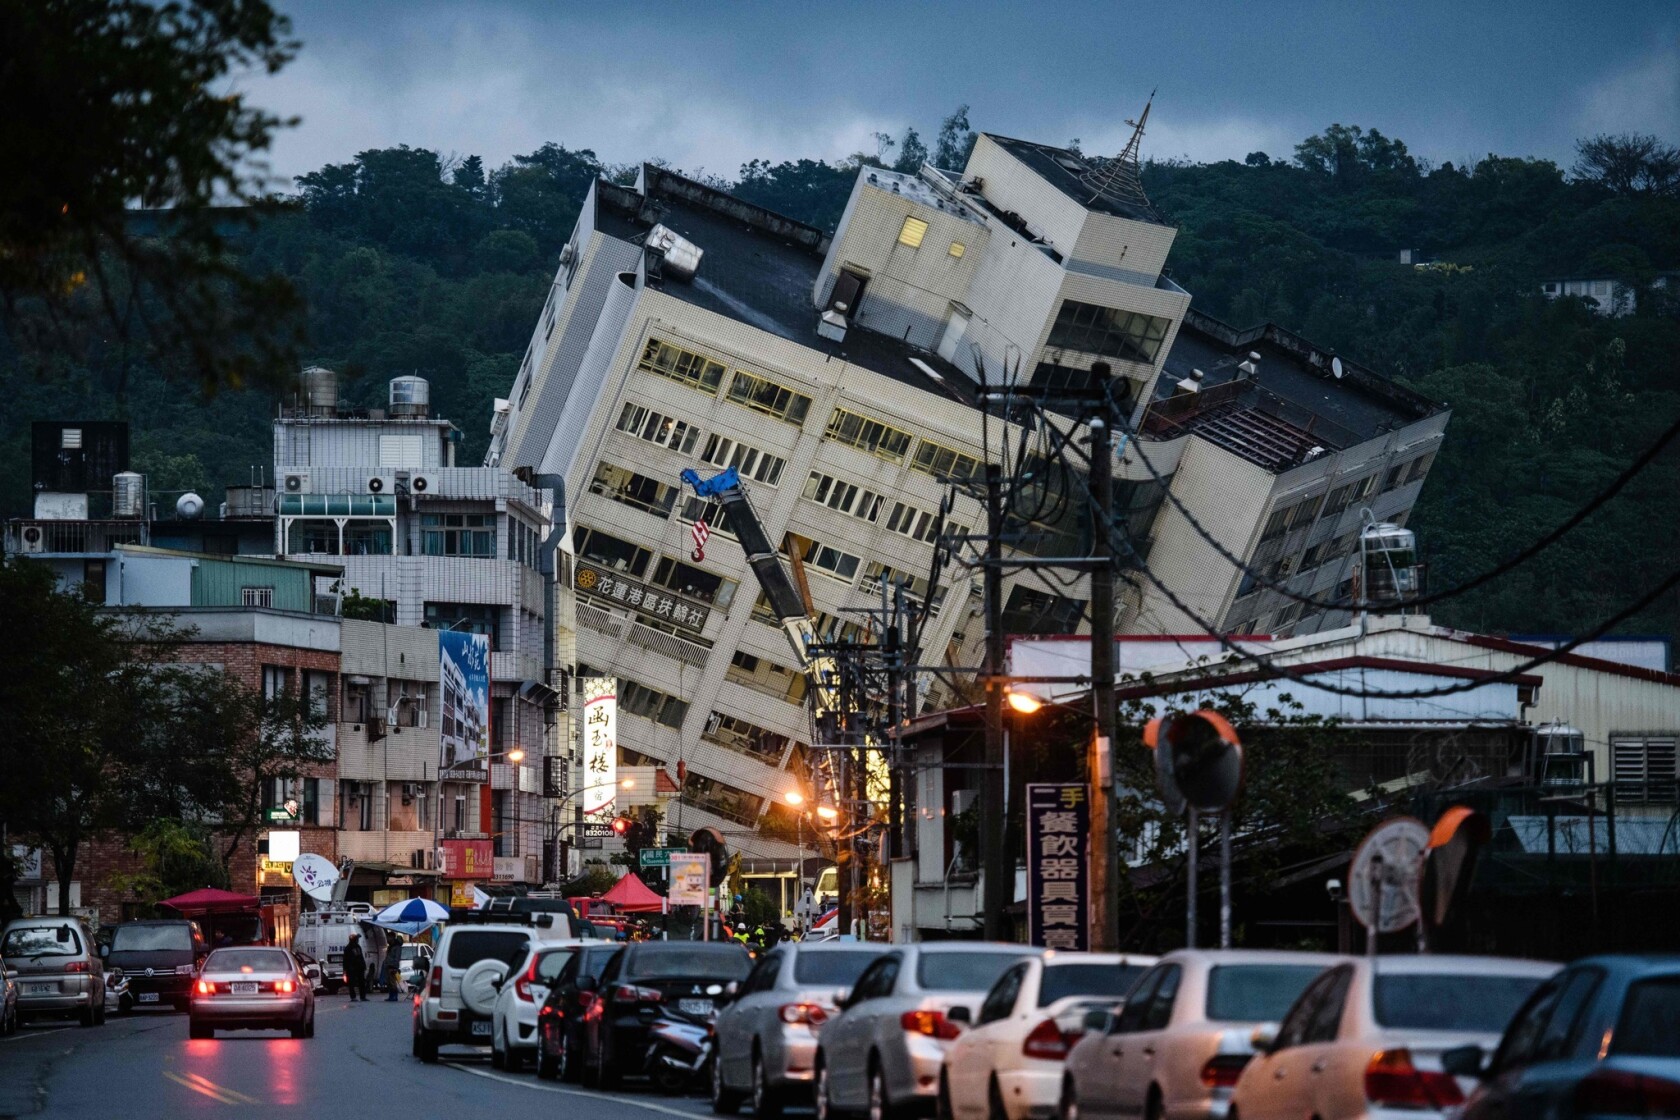 In Pictures: Aftermath of a 6.8 magnitude earthquake that hit Taiwan on Sunday | The Straits Times